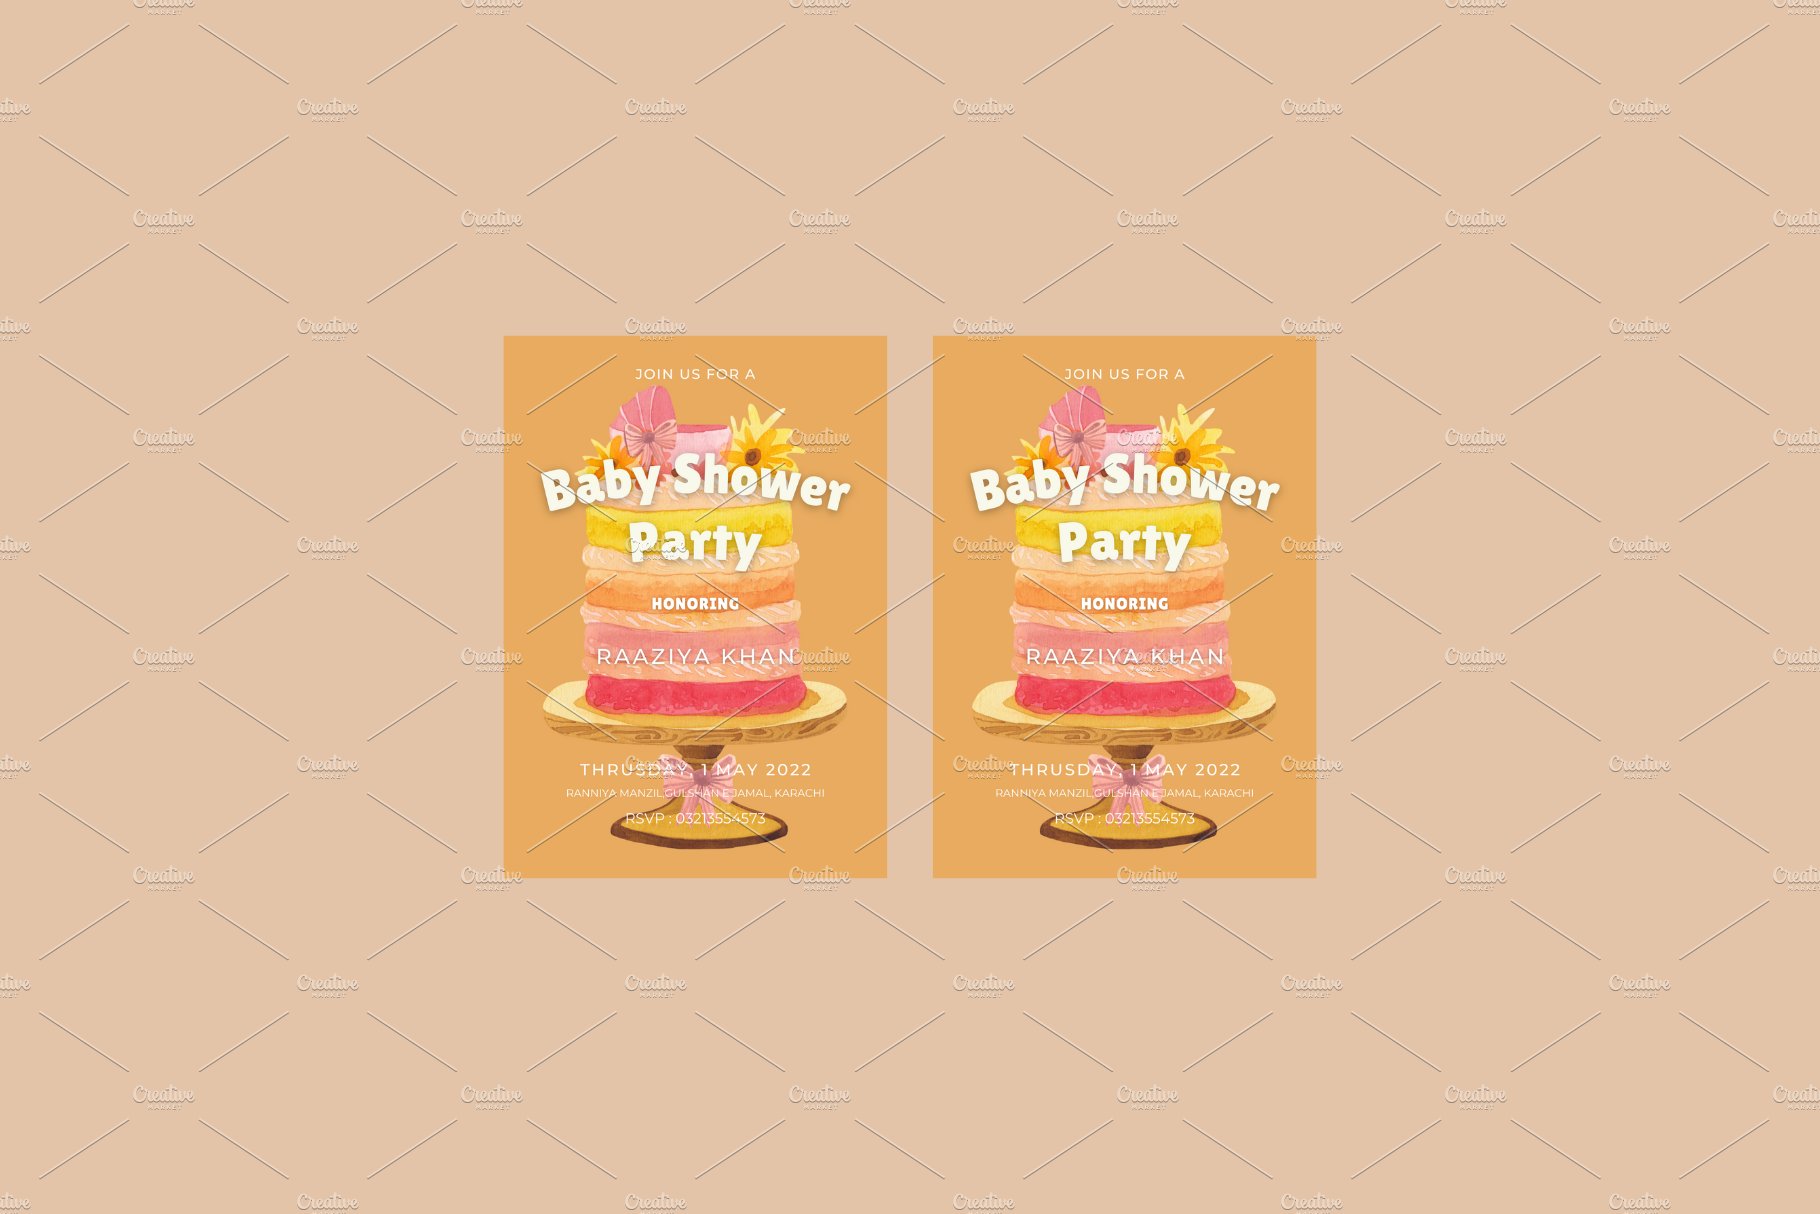 Cute Baby Shower Invitation cover image.